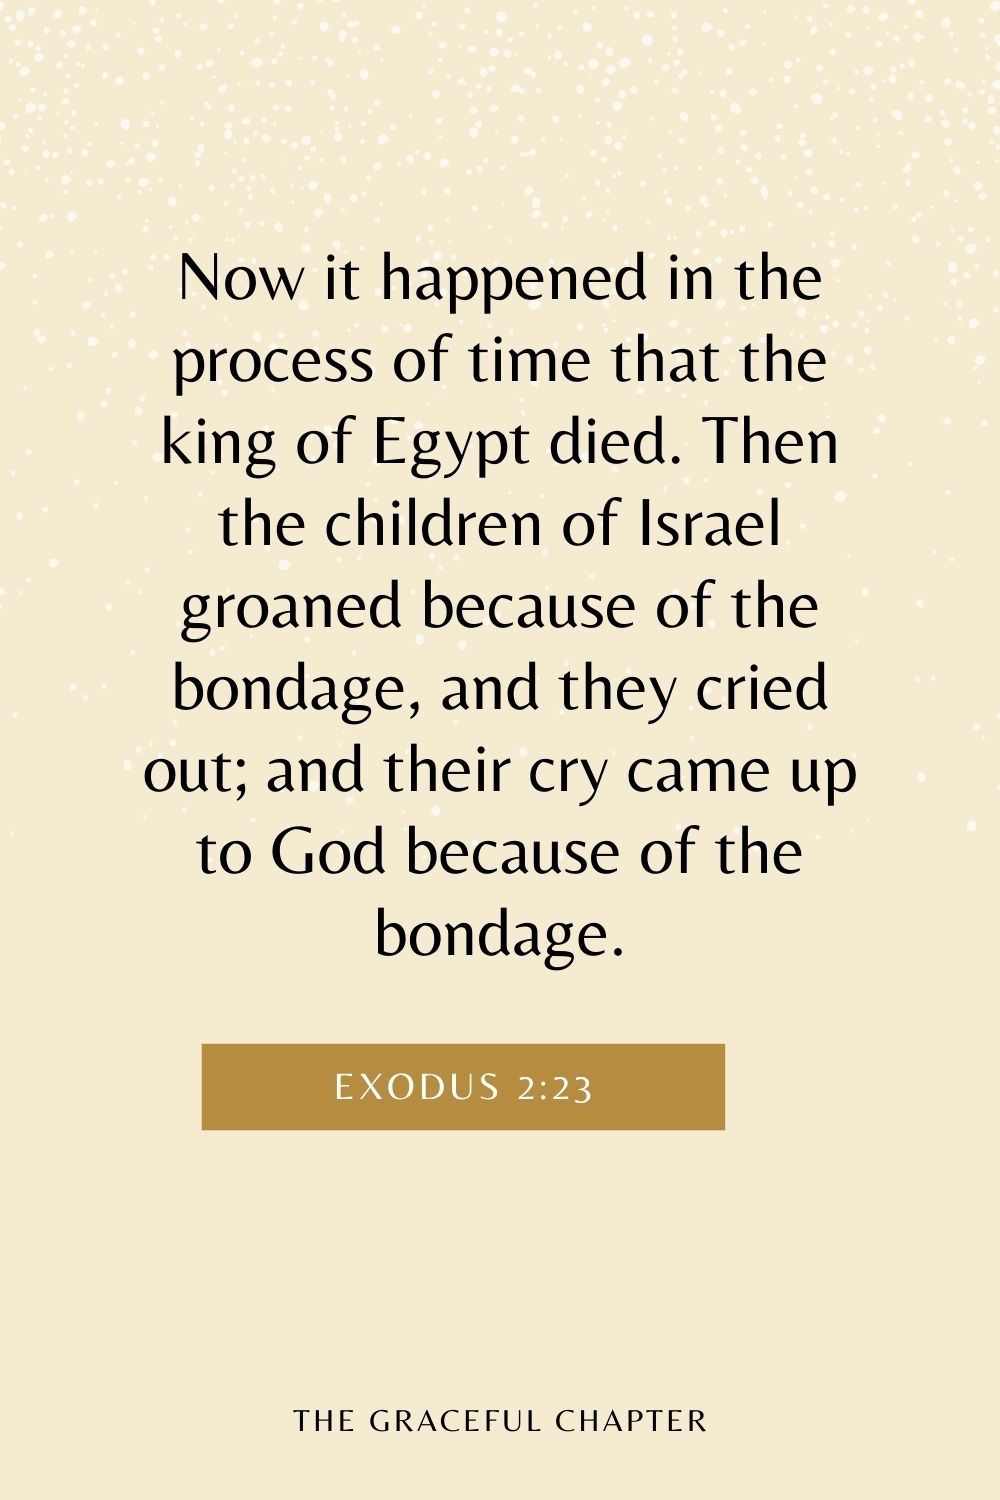 Now it happened in the process of time that the king of Egypt died. Then the children of Israel groaned because of the bondage, and they cried out; and their cry came up to God because of the bondage. Exodus 2:23